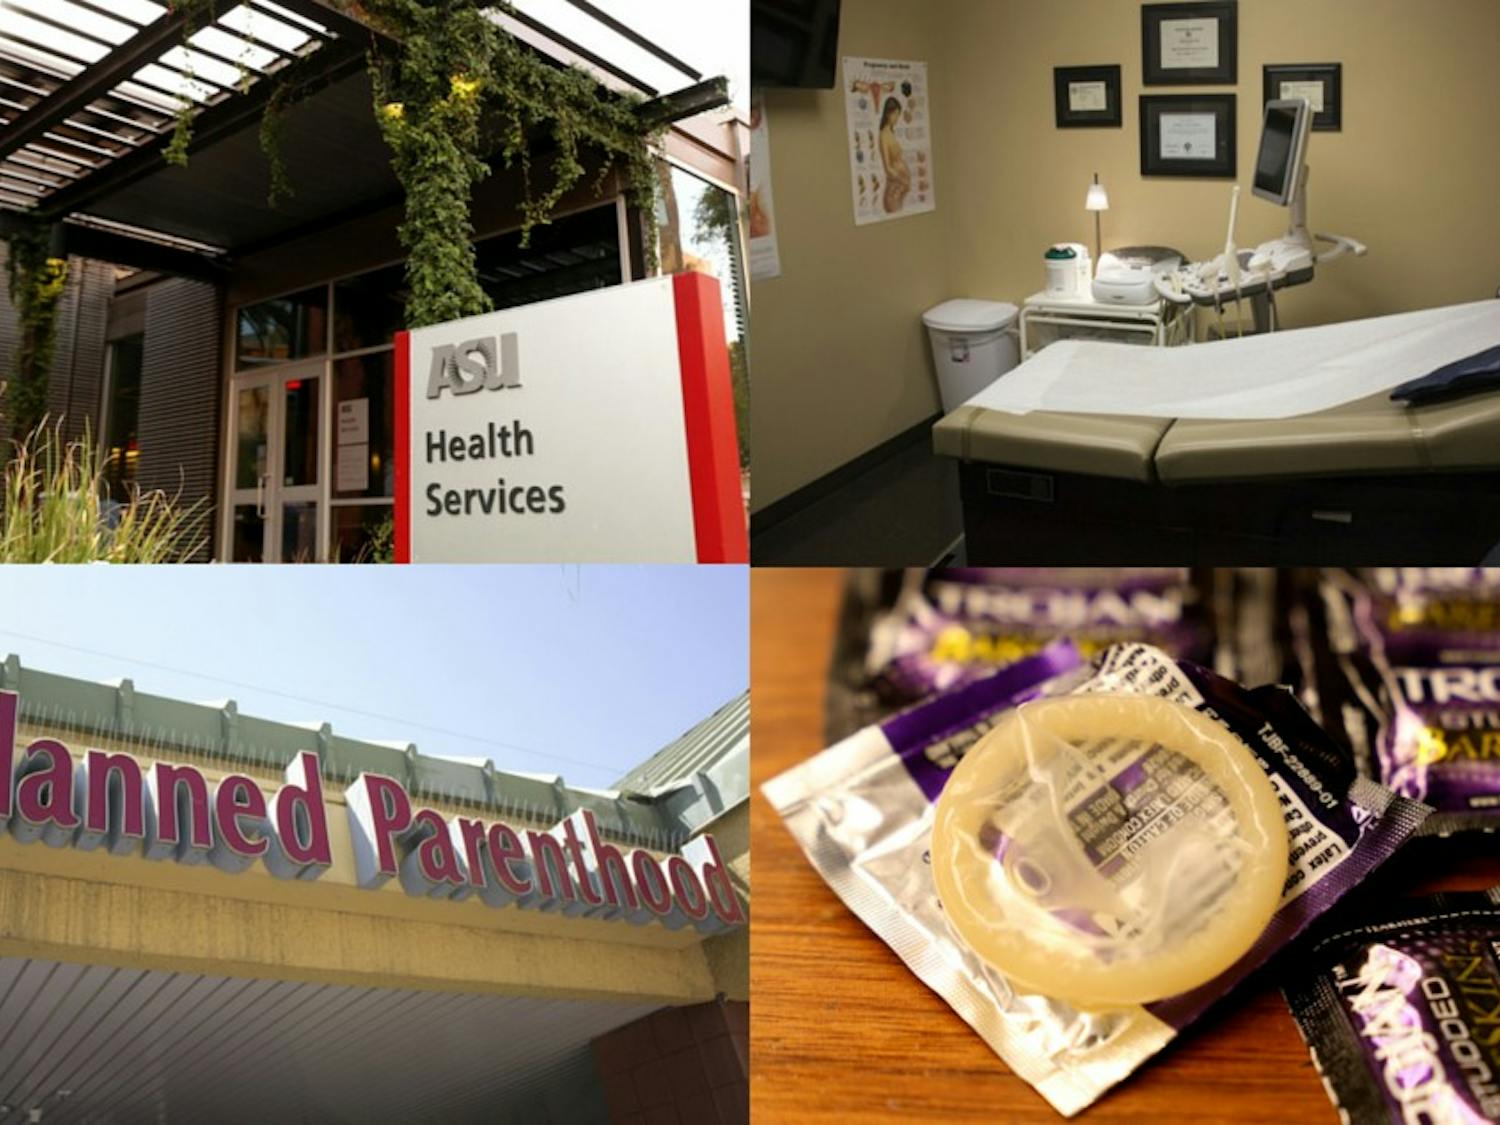 ASU Health Services building on the Tempe campus (upper left), inside the Choices Pregnancy Center (top right), outside of the Tempe Planned Parenthood building (bottom left), an illustration of Trojan condoms (bottom right).&nbsp;